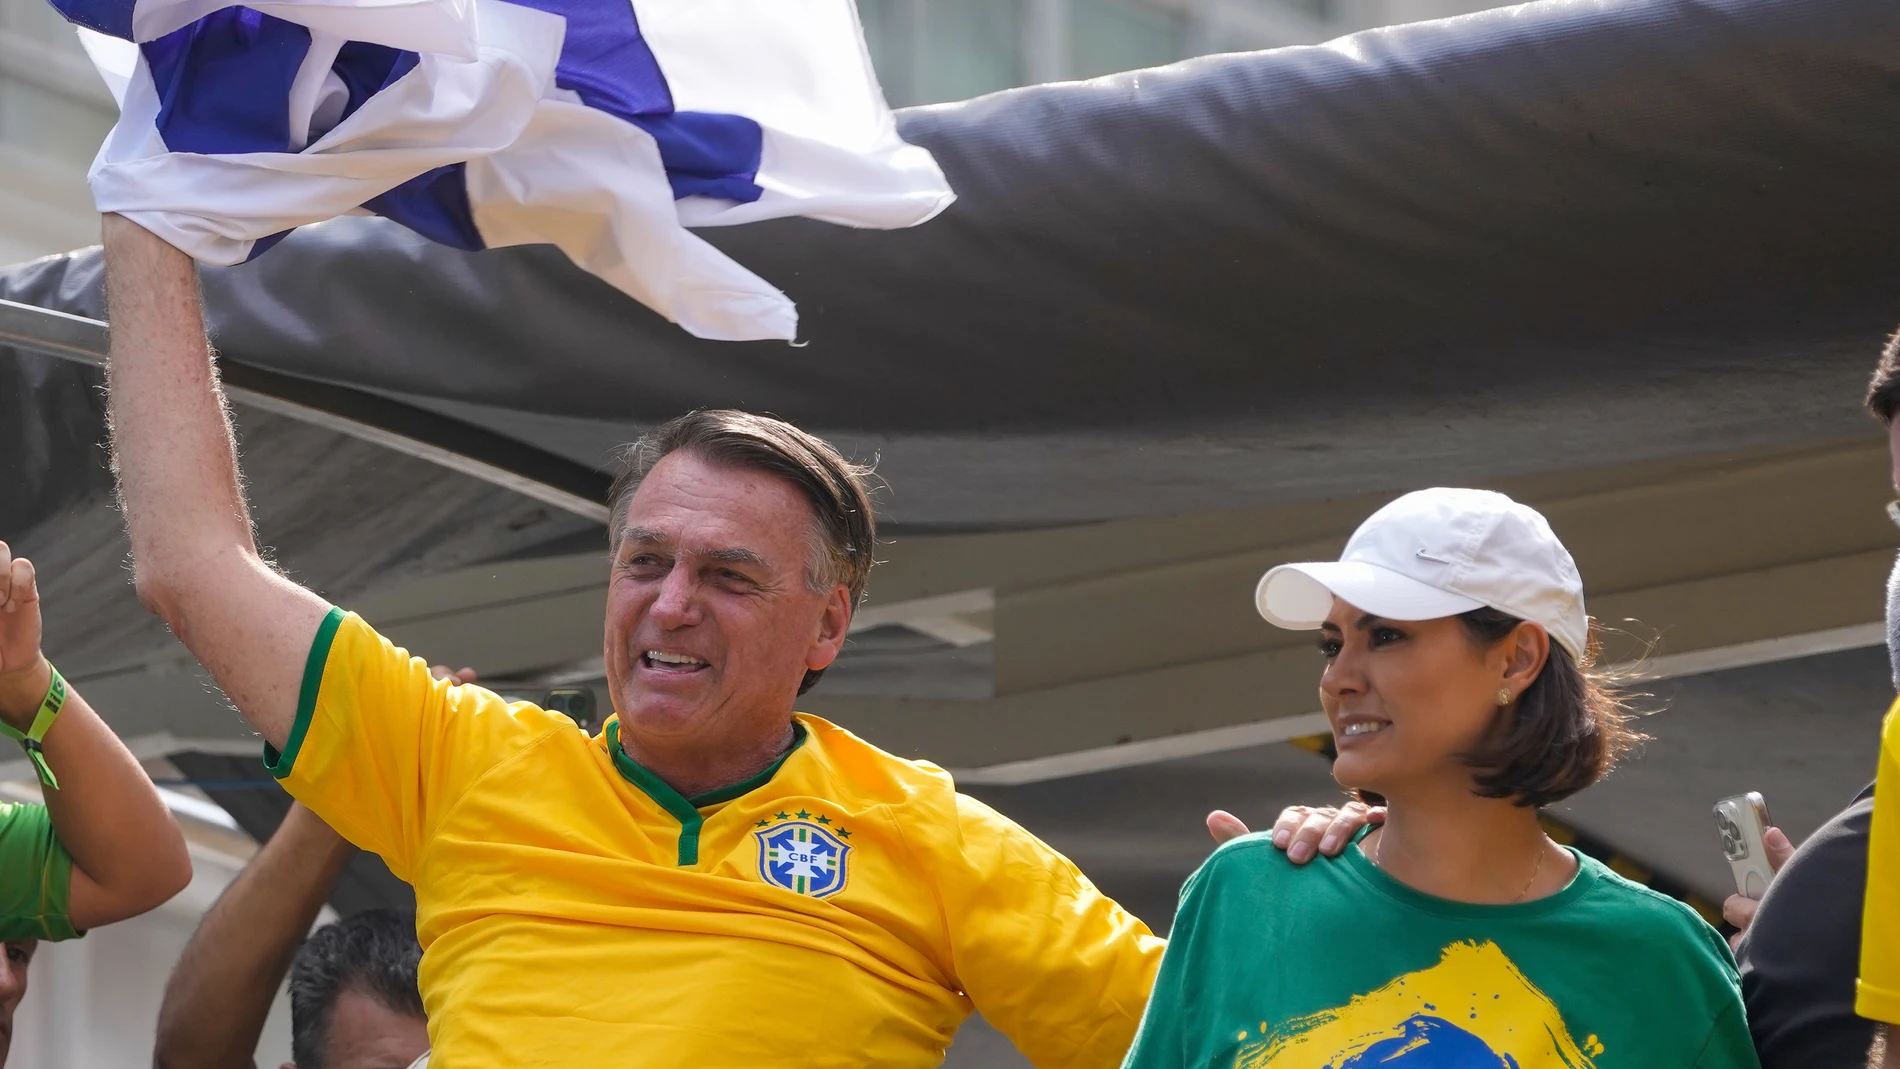 Former President Jair Bolsonaro waves a flag as he addresses supporters, accompanied by his wife Michelle, in Sao Paulo., Brazil, Sunday, Feb. 25, 2024. Bolsonaro and some of his former top aides are under investigation into allegations they attempted plotted a coup to remove his successor, Luis Inacio Lula da Silva. (AP Photo/Andre Penner)